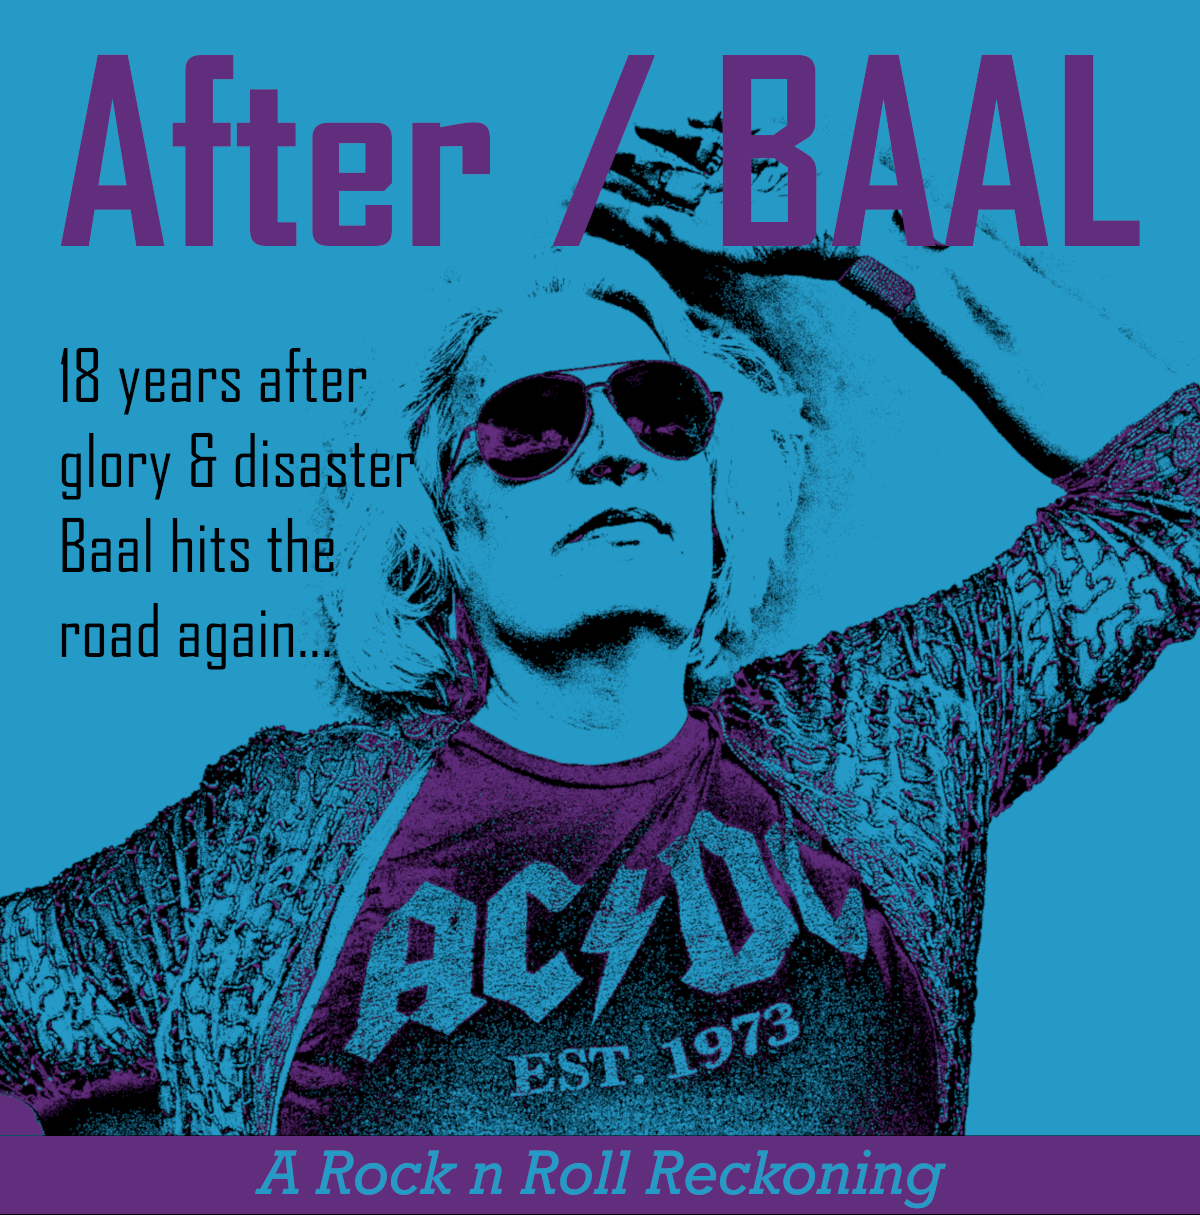 After / Baal poster image